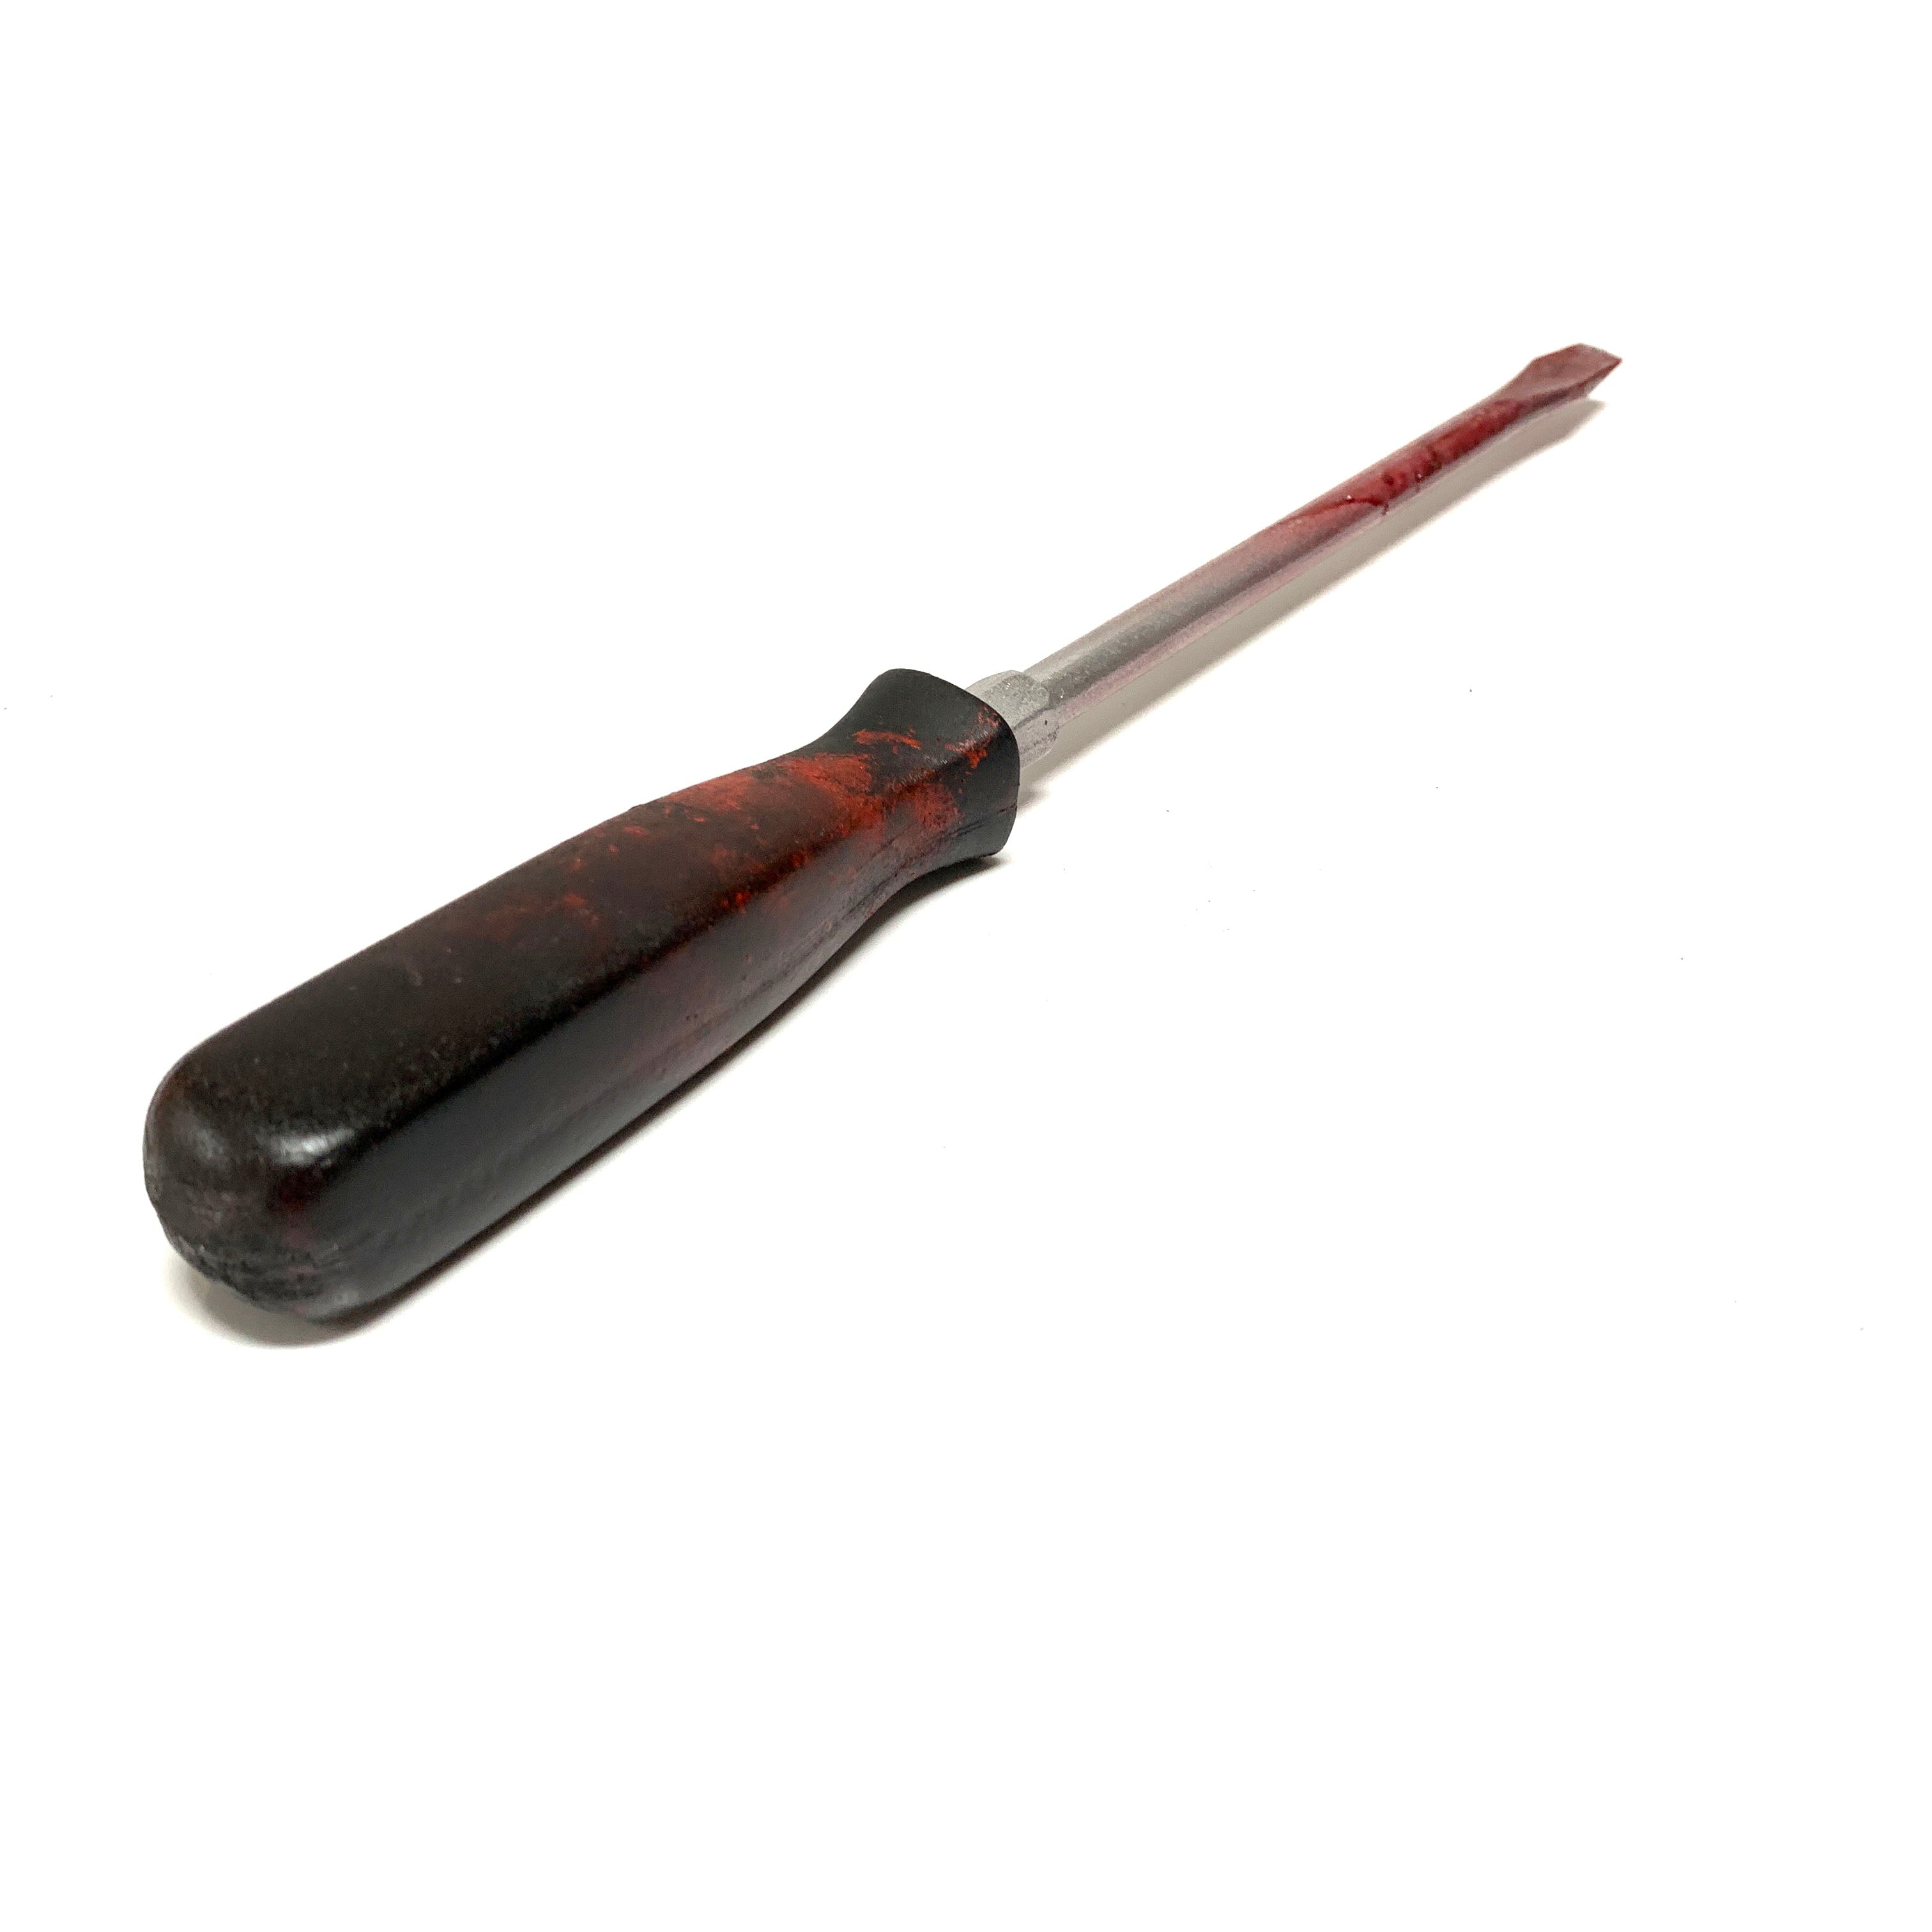 Rigid Plastic Screwdriver Prop - BLOODY - Bloodied Head with Black Handle